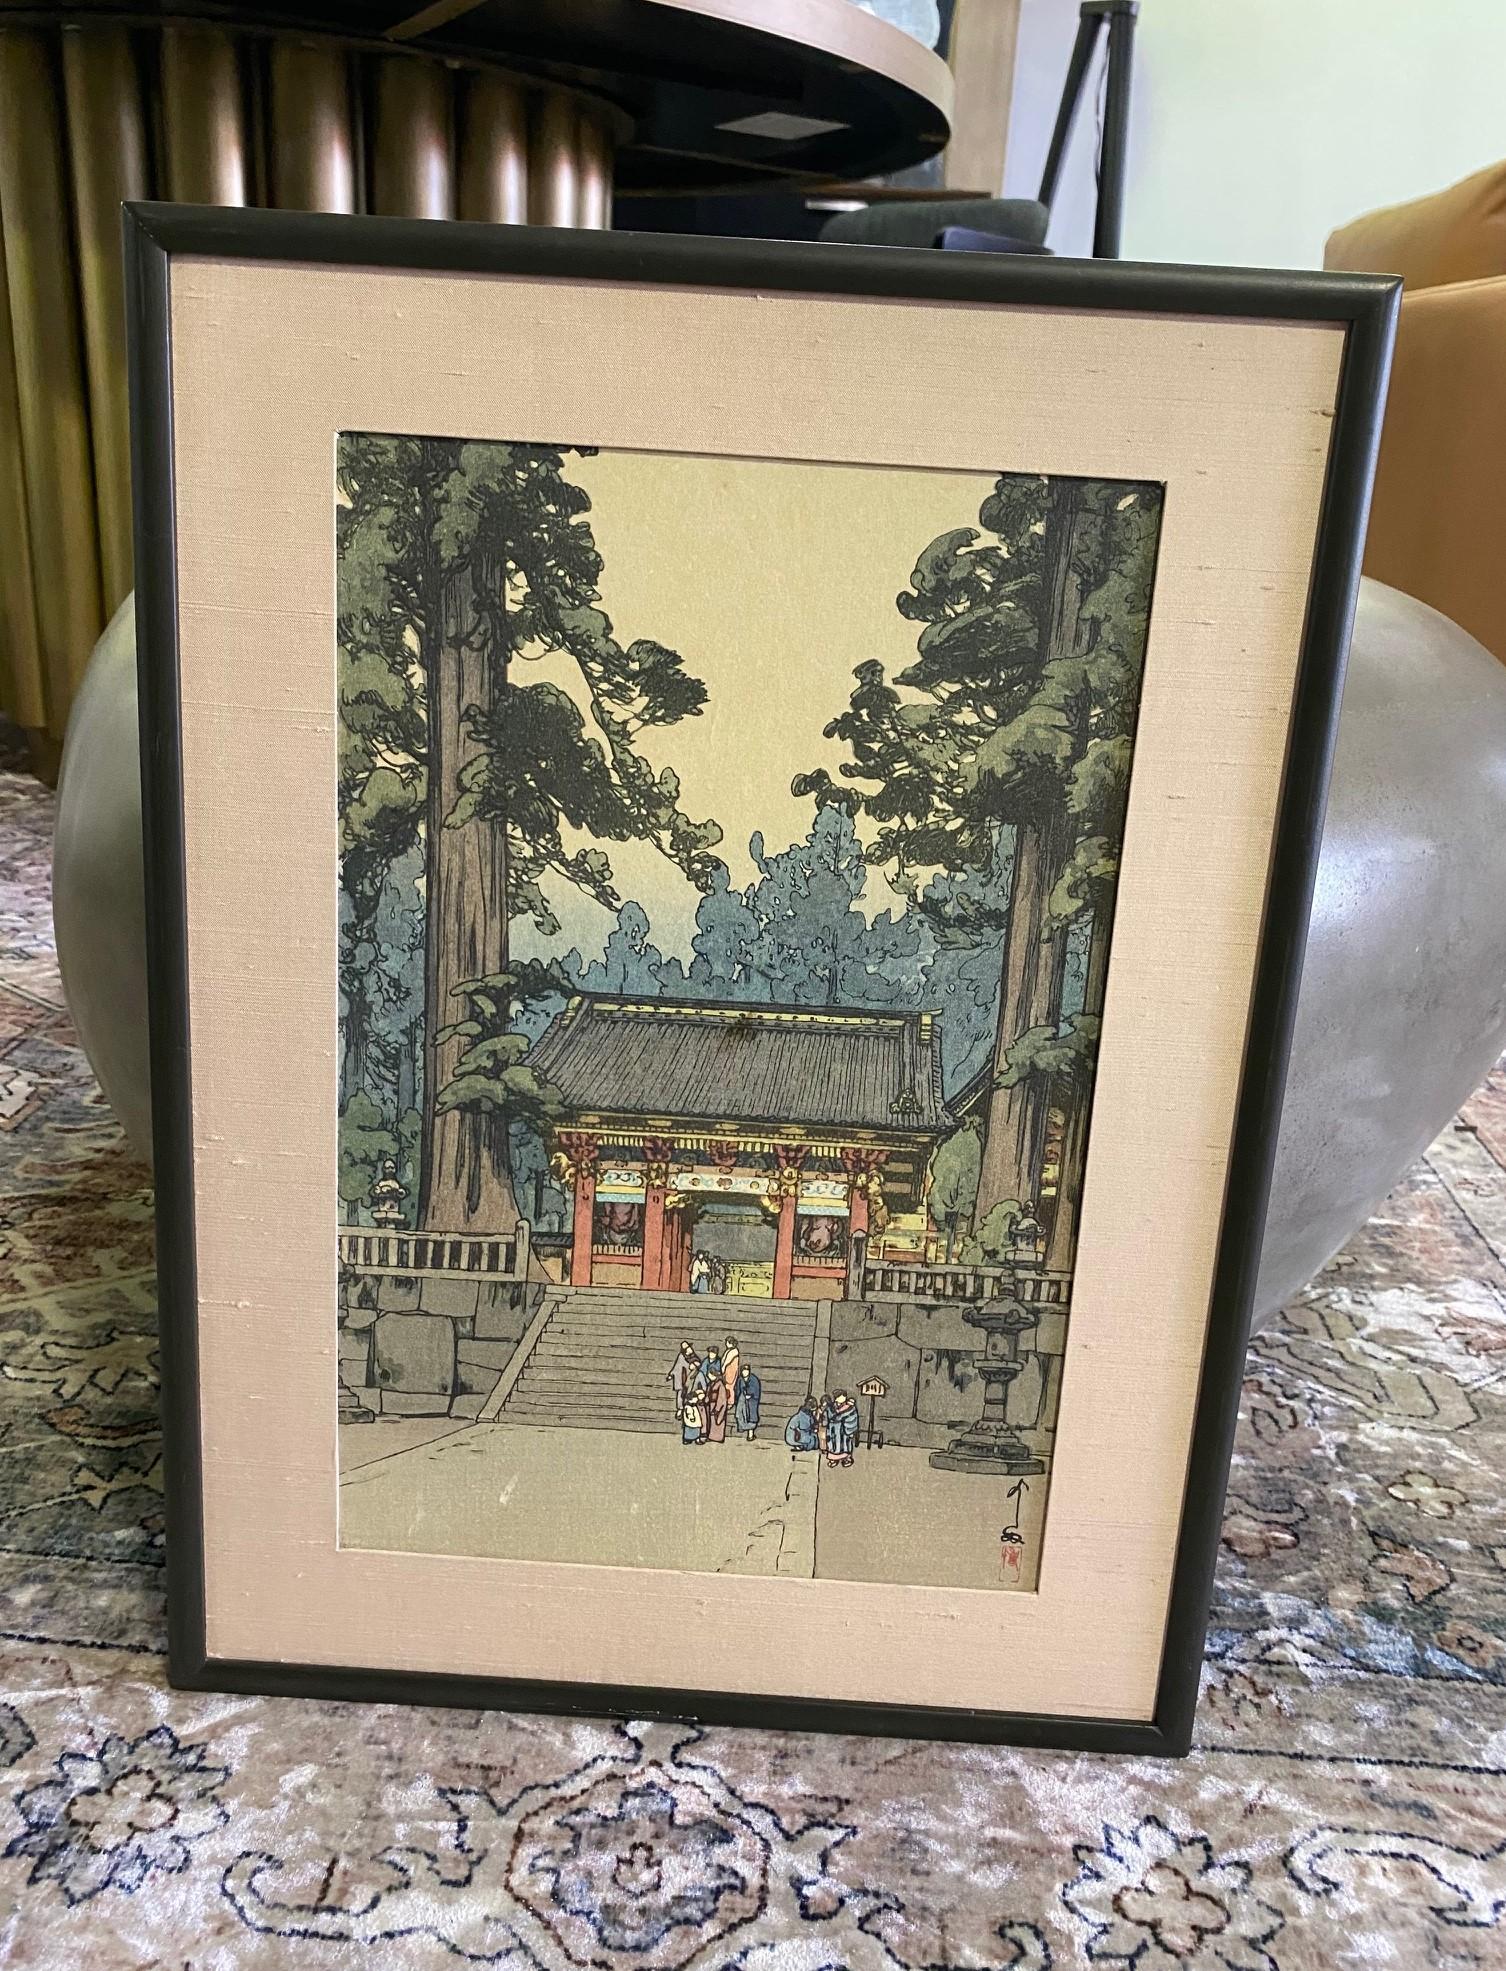 This wonderful image of the Toshogu Shrine in Nikko surrounded by luscious, green forest with various people descending from the shrine steps and gathering in the courtyard is titled 